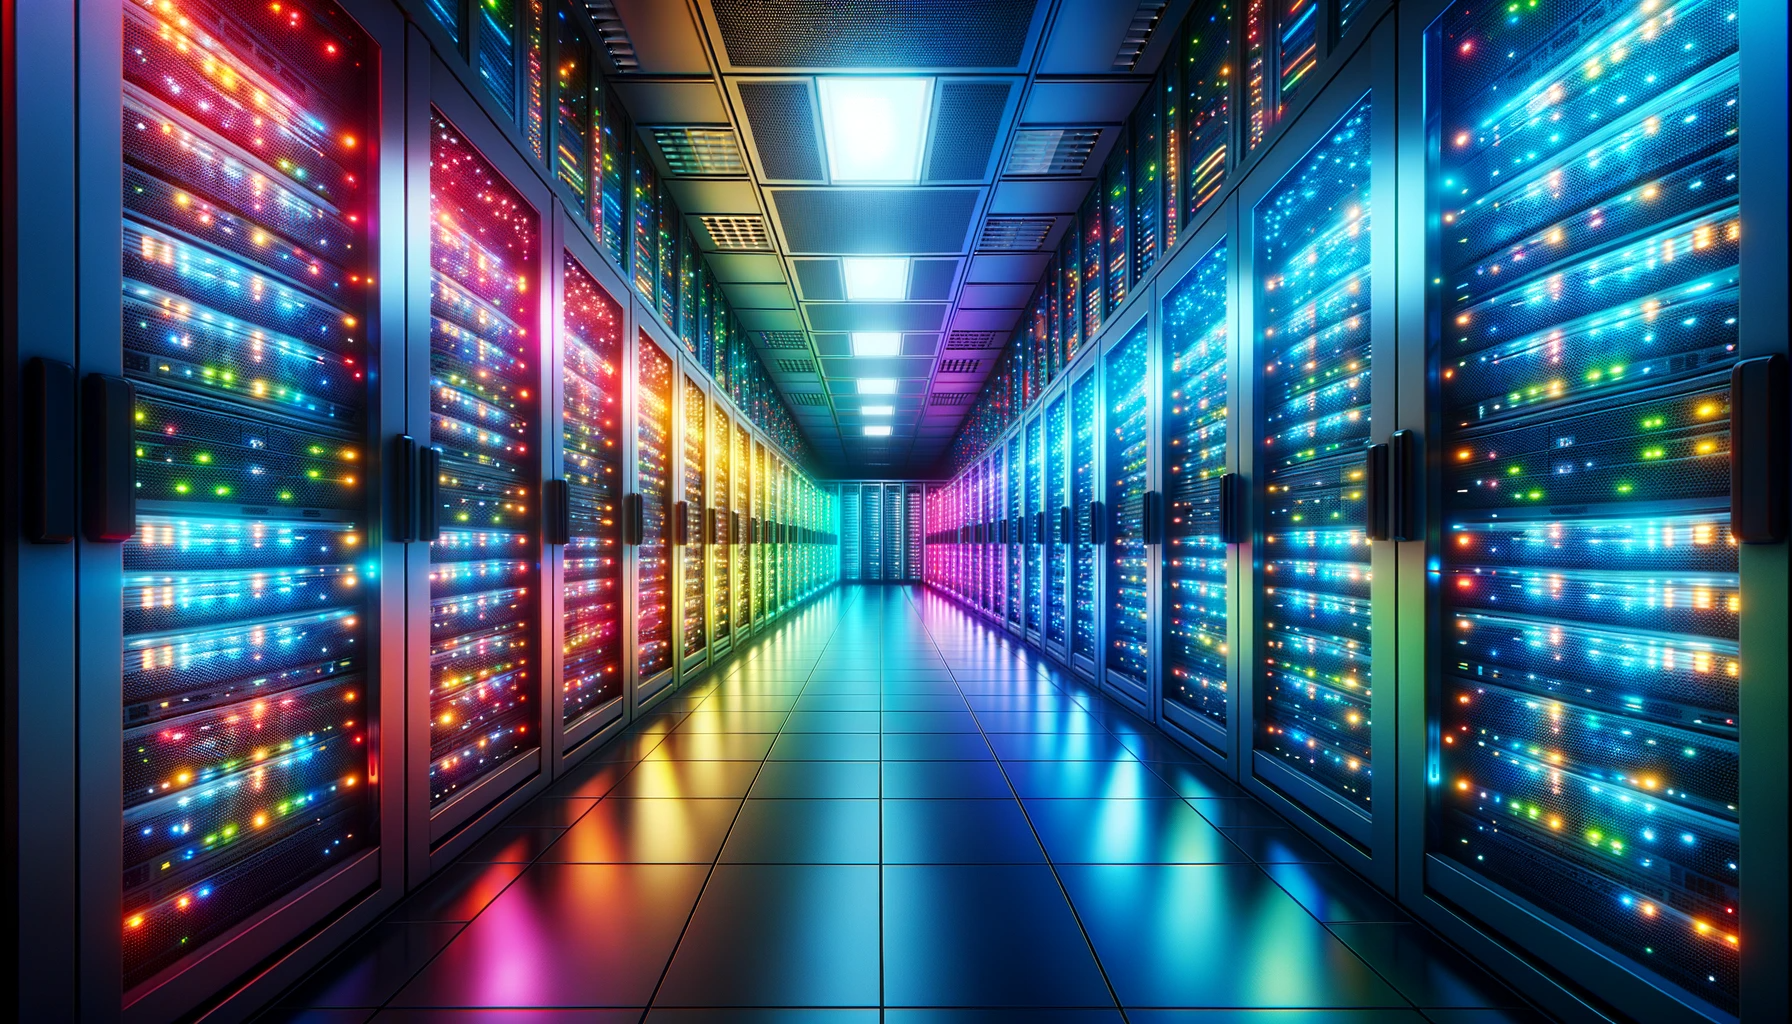 Server room illuminated with different colors, each representing a unique hosting type, showcasing the diversity of hosting solutions available.